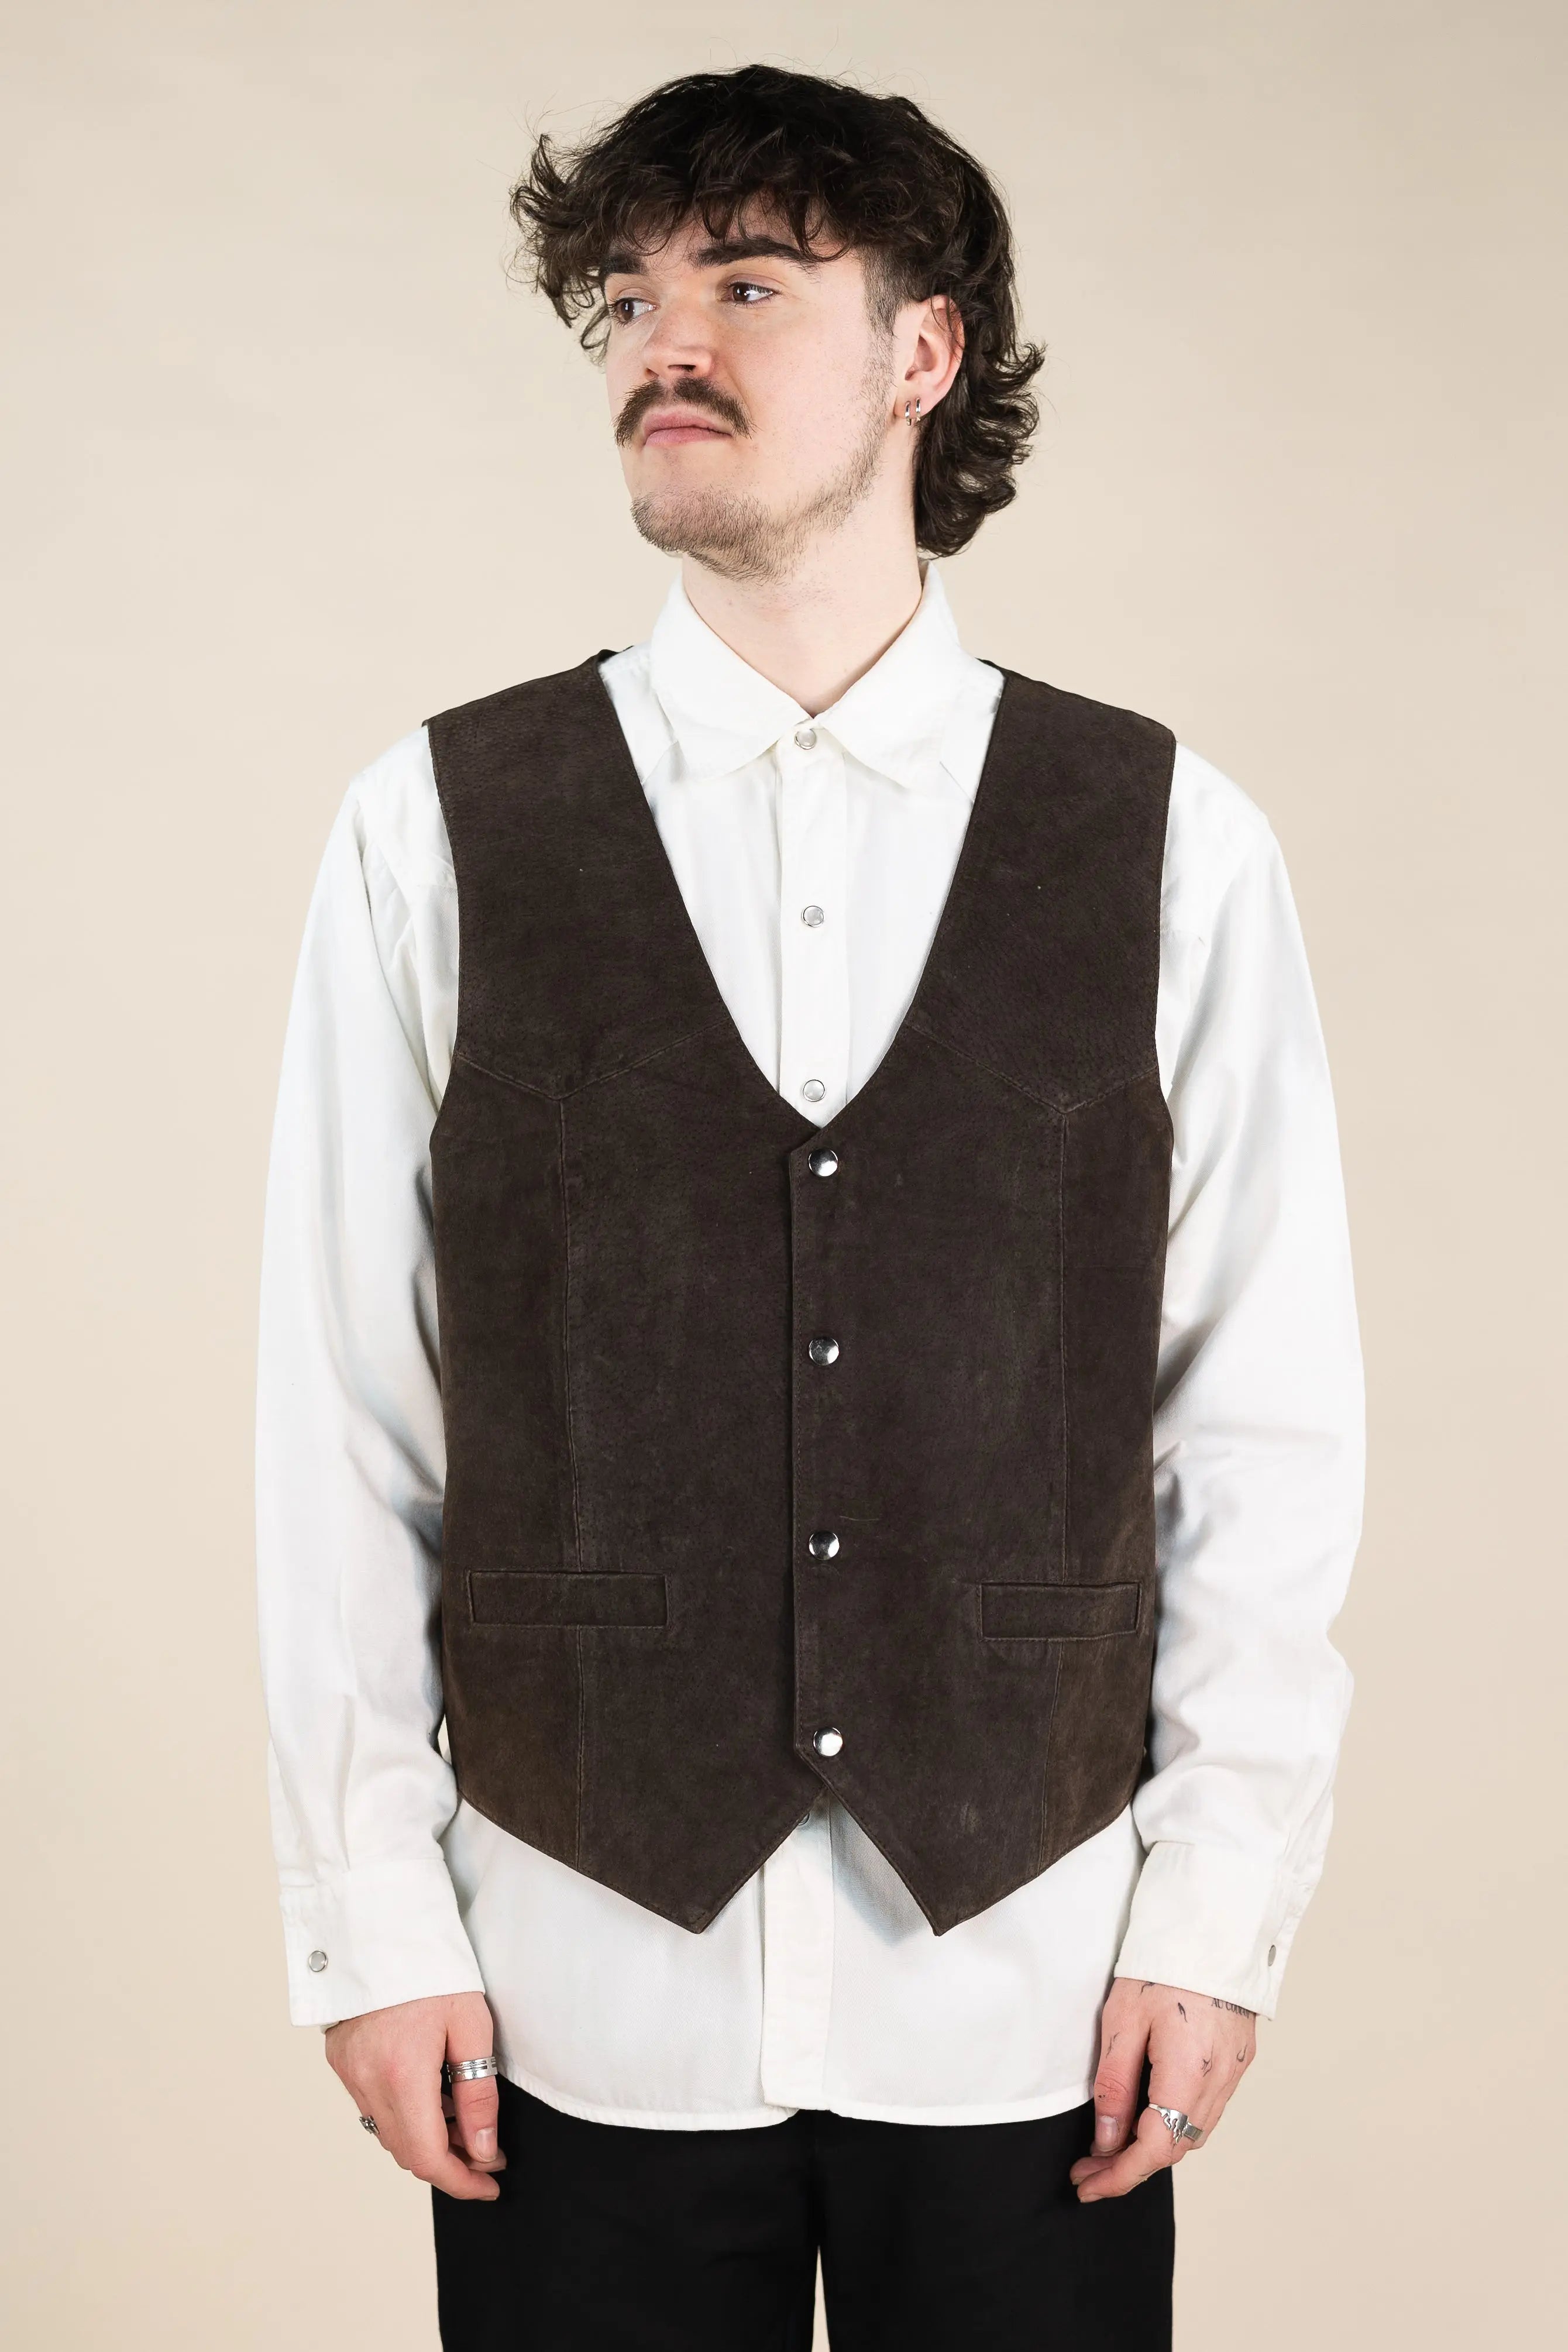 Westeria Frontier - Suede Waistcoat- ThriftTale.com - Vintage and second handclothing